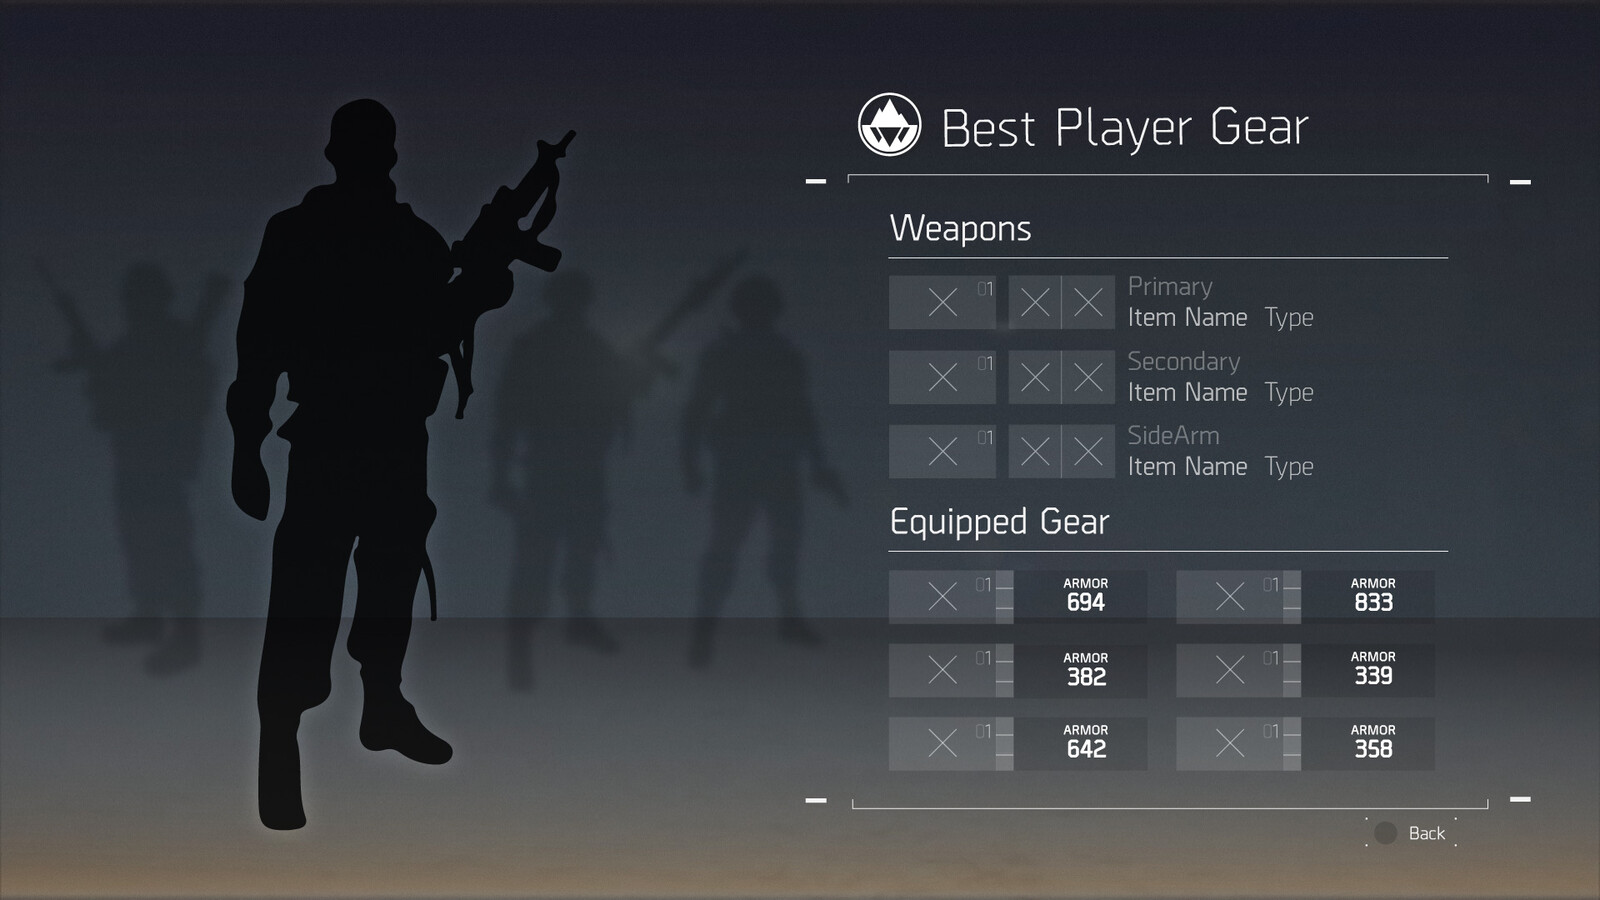 Best Player Gear / Pressing inspect  allows players to inspect teammates equipped gear and weapons.